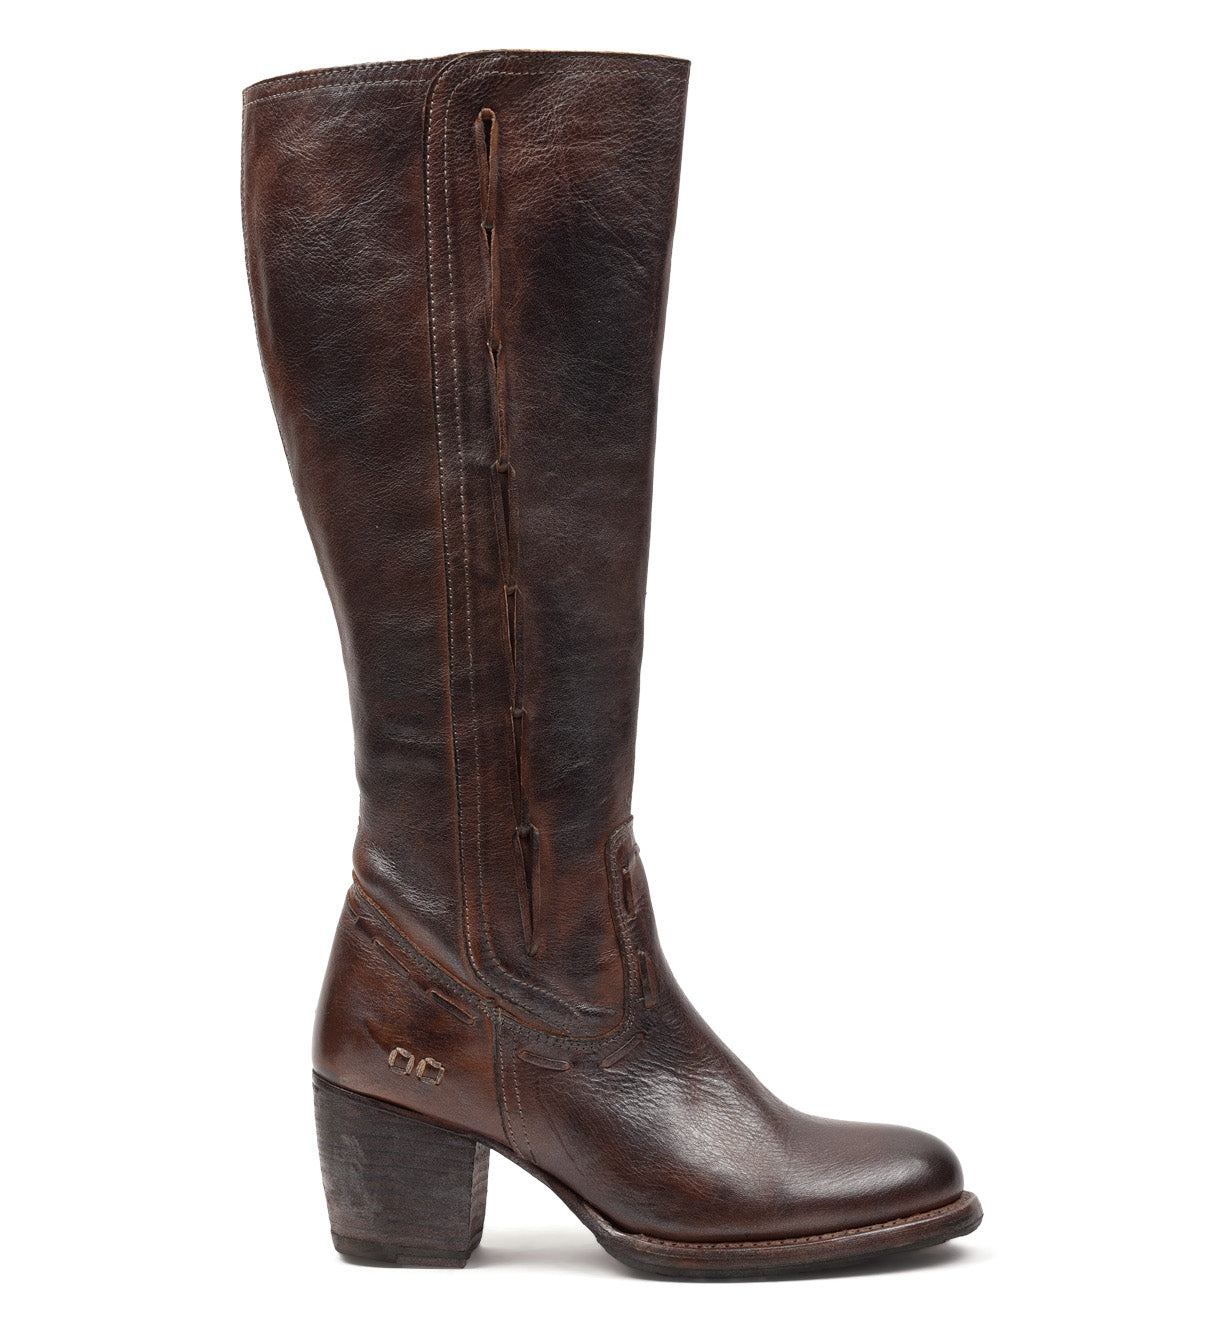 A women's teak leather Fate boot with a zipper on the side, made by Bed Stu.